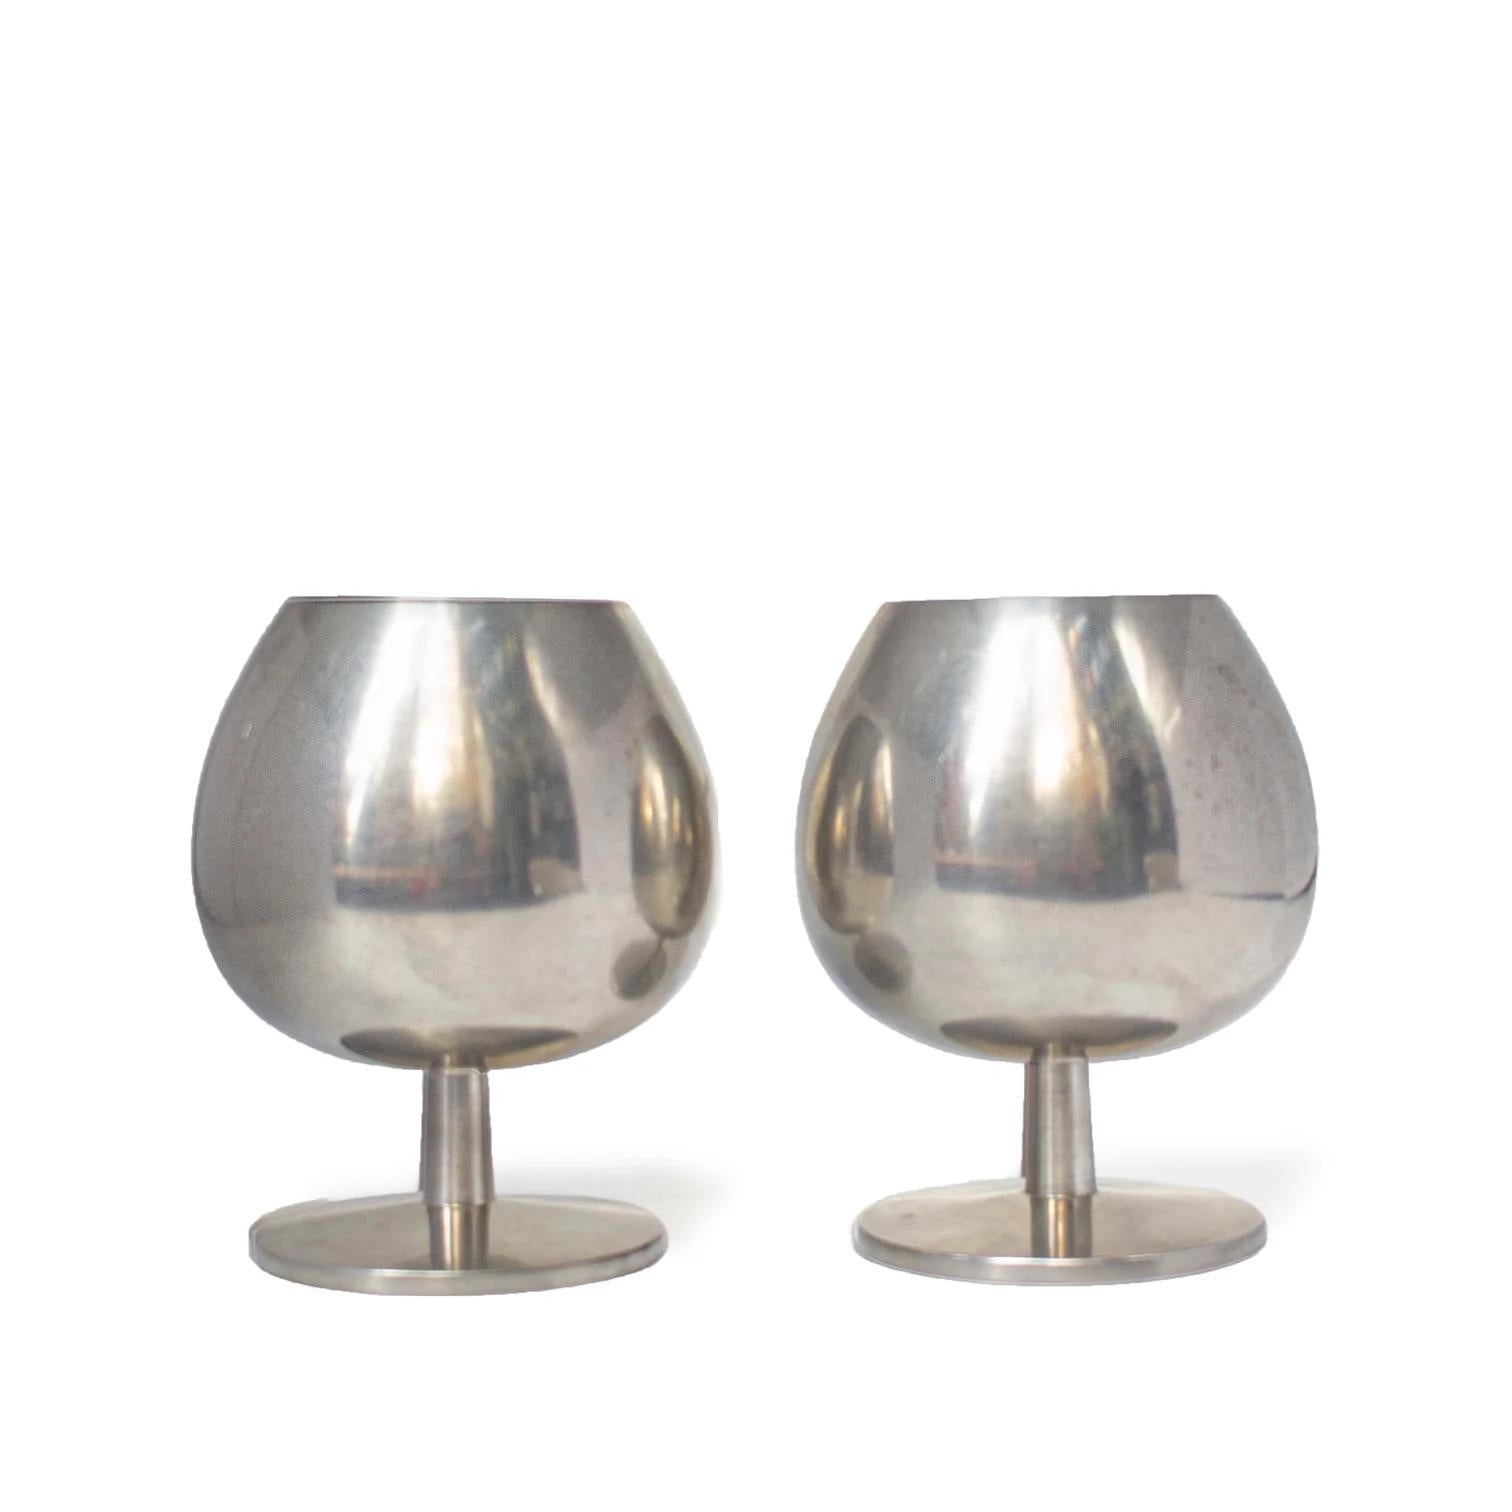 Liquour Goblets by Metawa Holland.

Made in the Netherlands.
Material: silverplate metal.
1960s.
Measures: 3 x 3.5 in / each.


Set of two metal cognac glasses. These goblets with a short stem and balloon rounded cup make the perfect glass